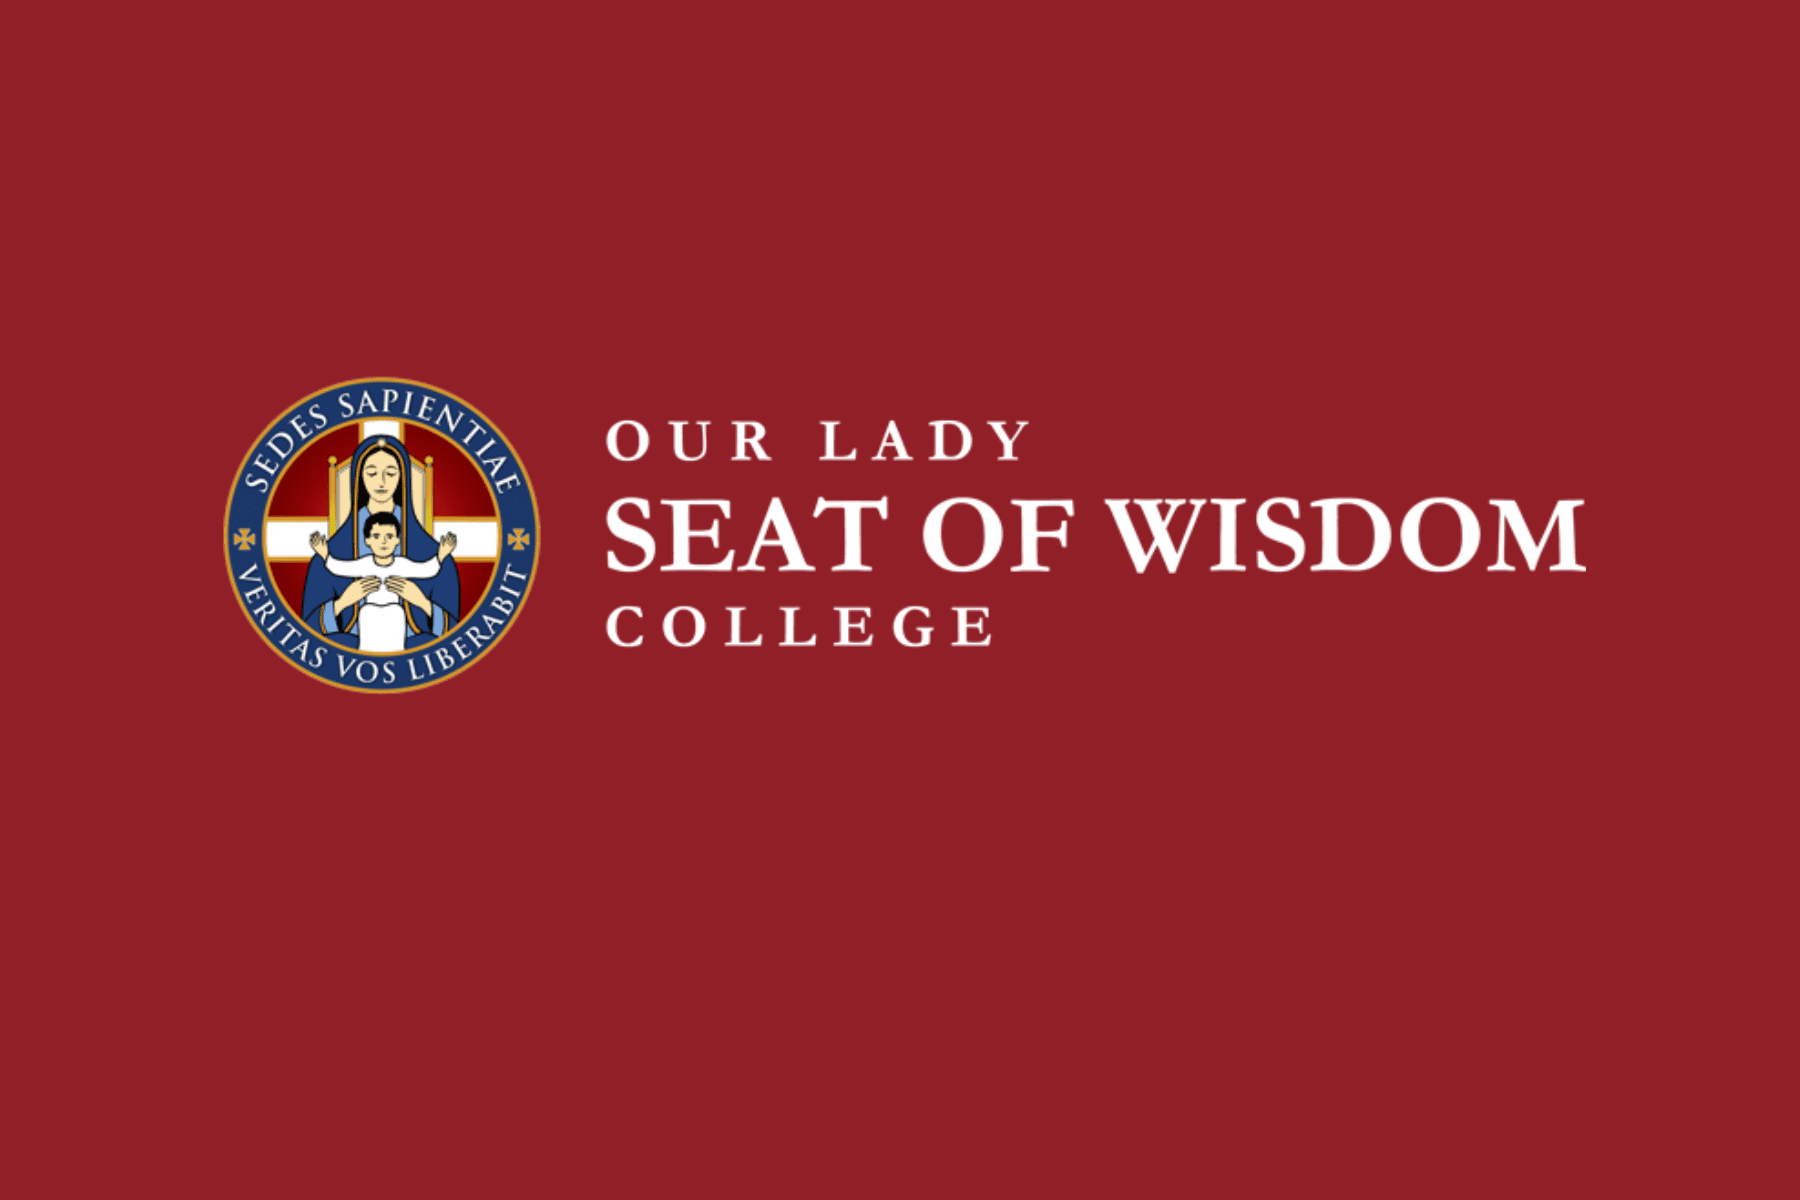 Our Lady Seat of Wisdom College information session September 30